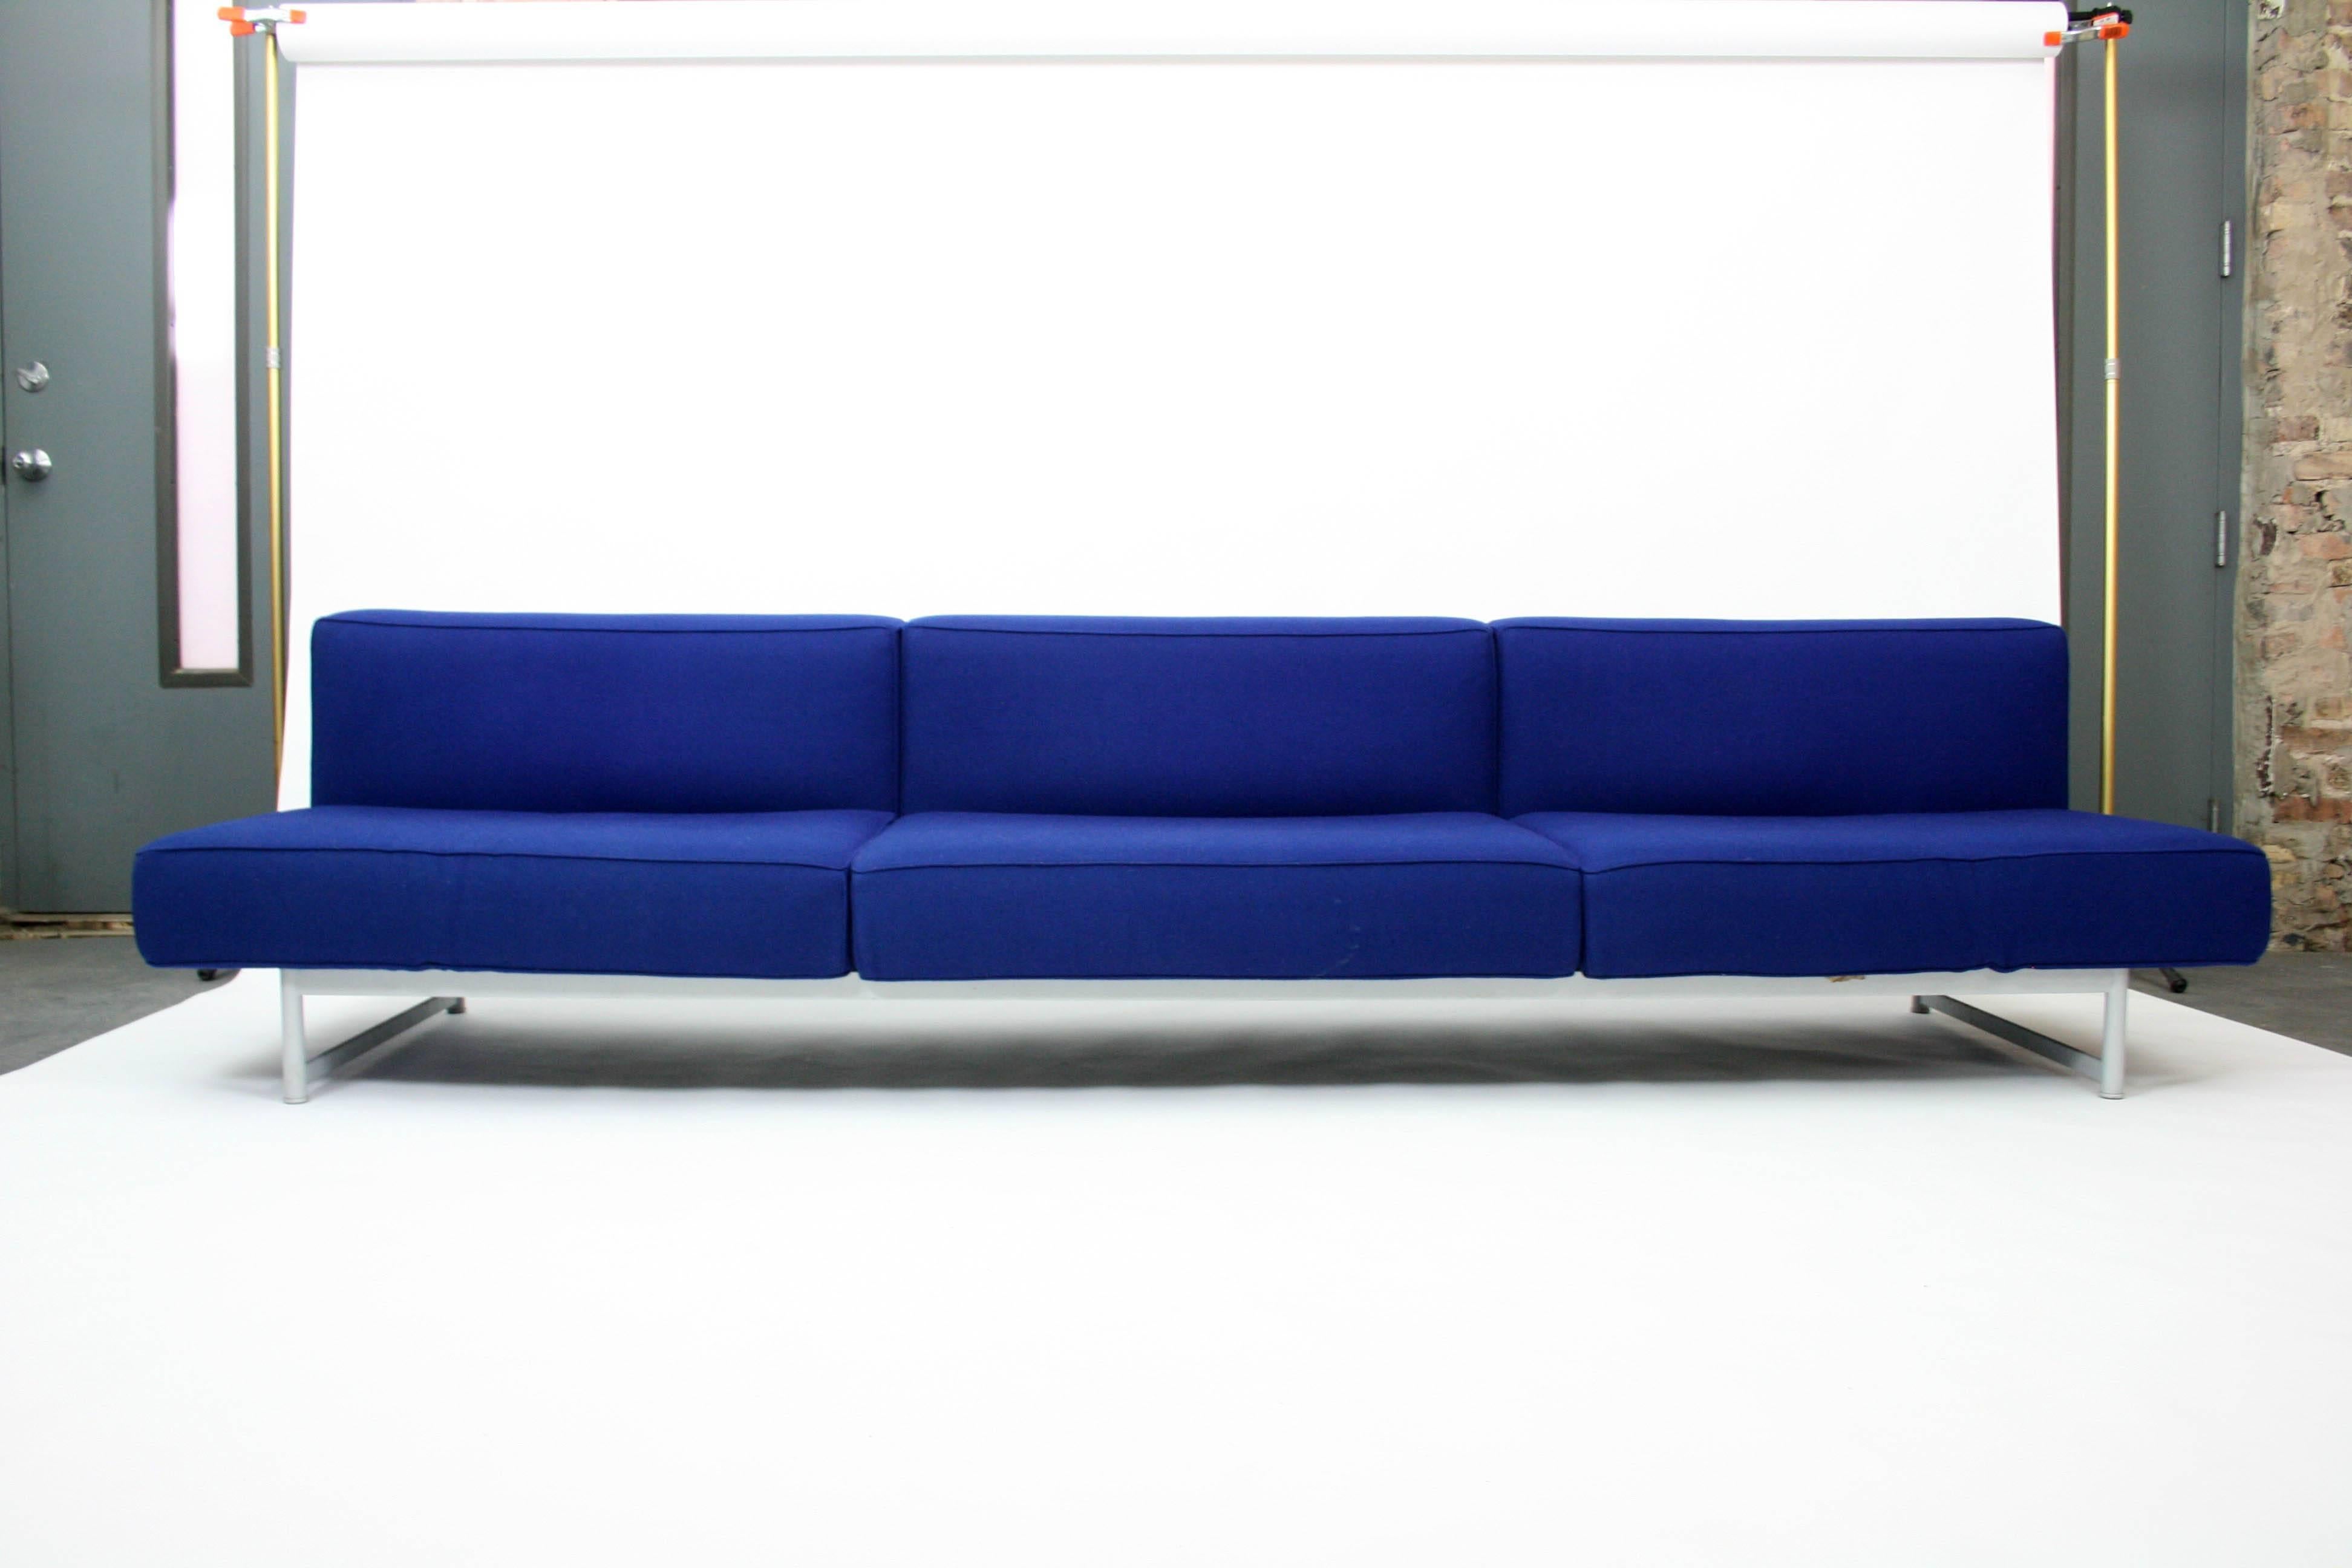 
Piero Lissoni Reef four-seat sofa for Cassina in blue felt. The sofa is in excellent condition and the fabric is super soft. Each end part can be tilted at four different positions to be used as headrest. This is a rare sofa that is no longer in